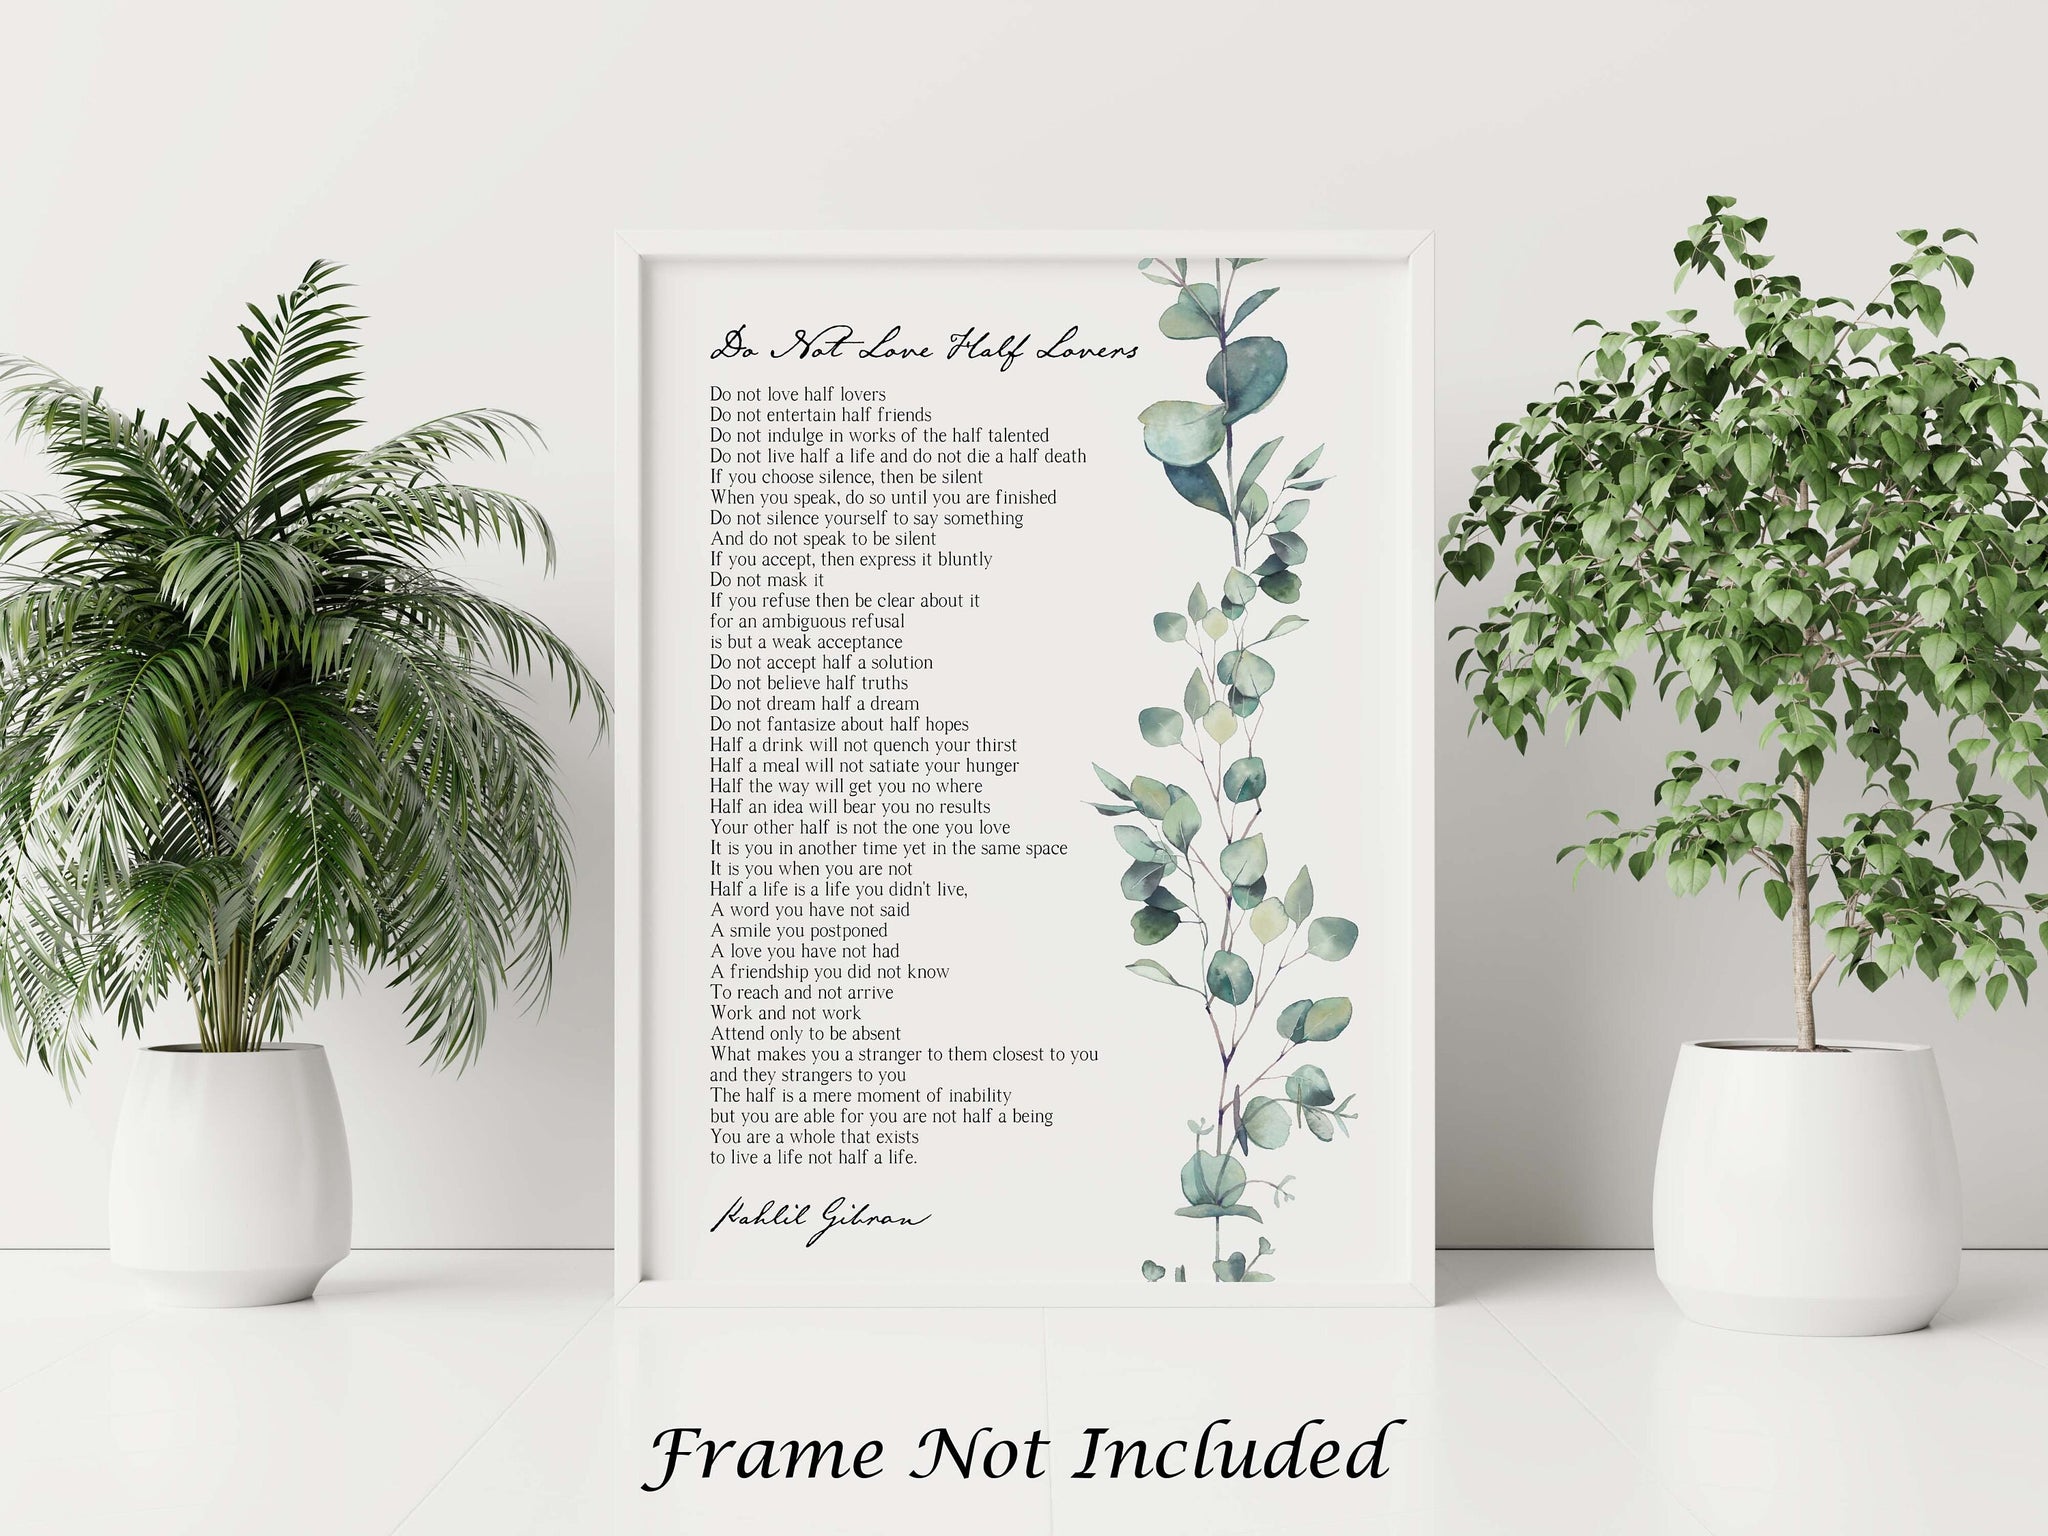 Do Not Love Half Lovers Poster Print by Kahlil Gibran Be True to Yourself  Poem Print Poetry Print UNFRAMED 